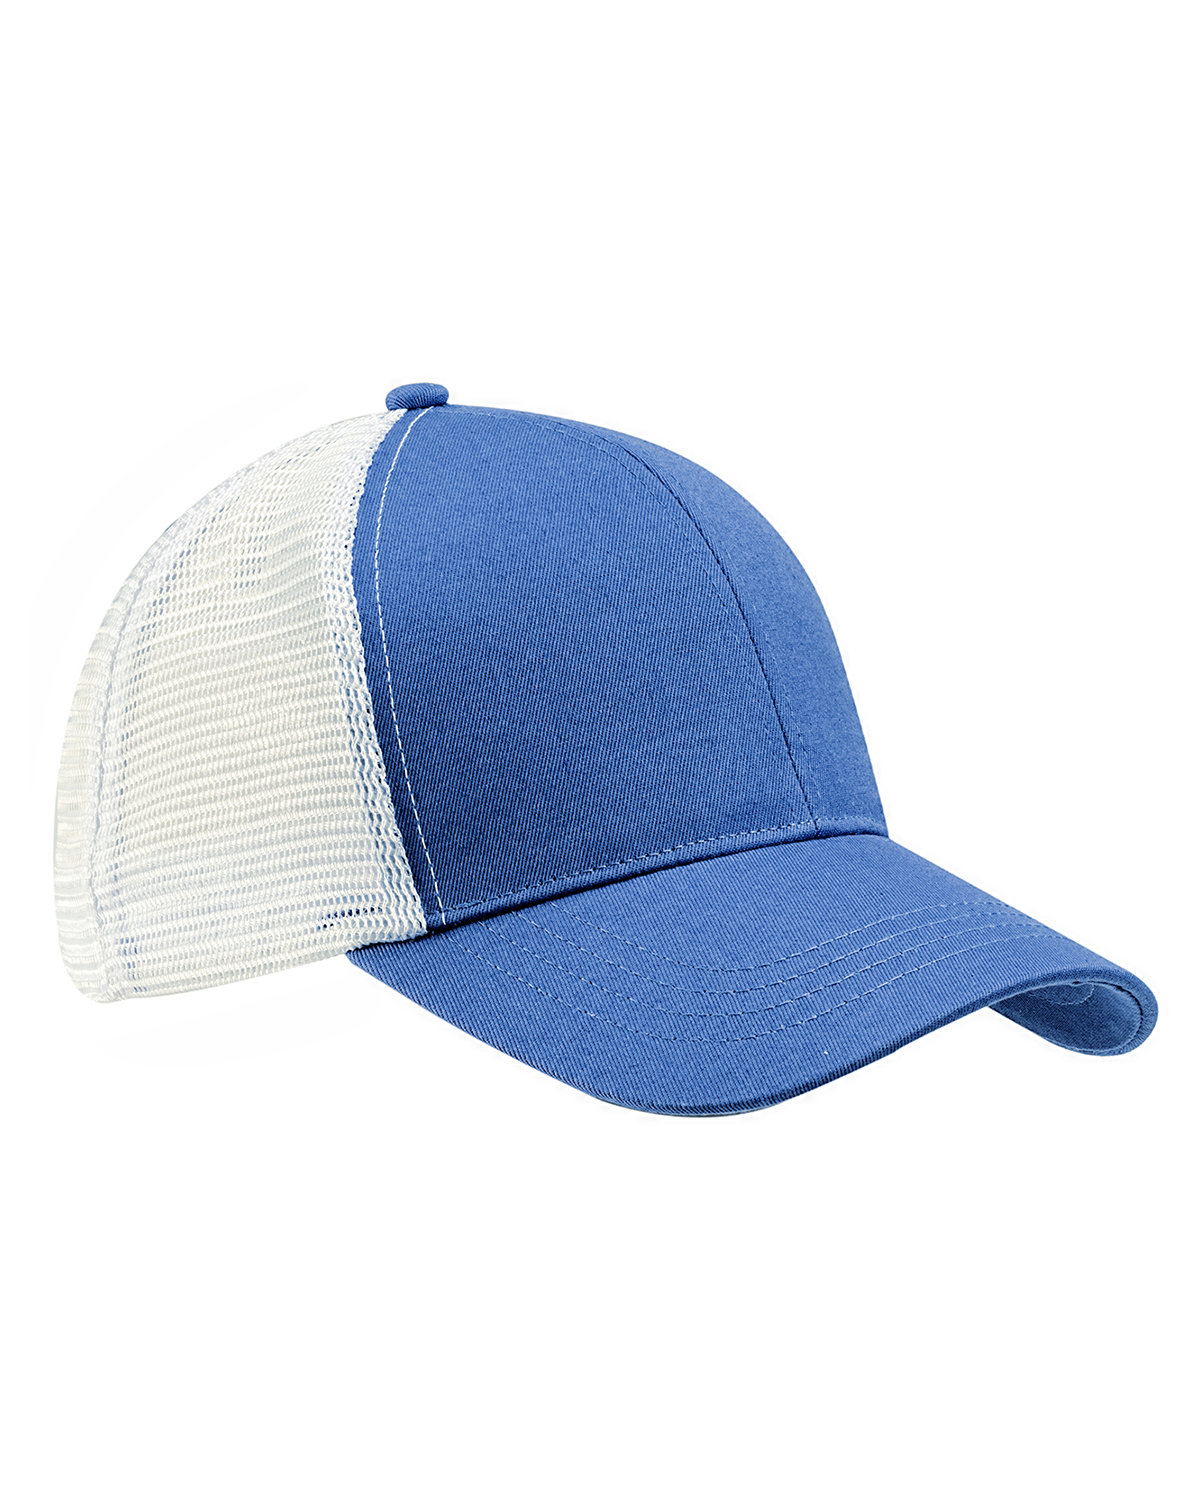 econscious Eco Trucker Organic/Recycled Hat DAYLGHT BLU/ WHT 